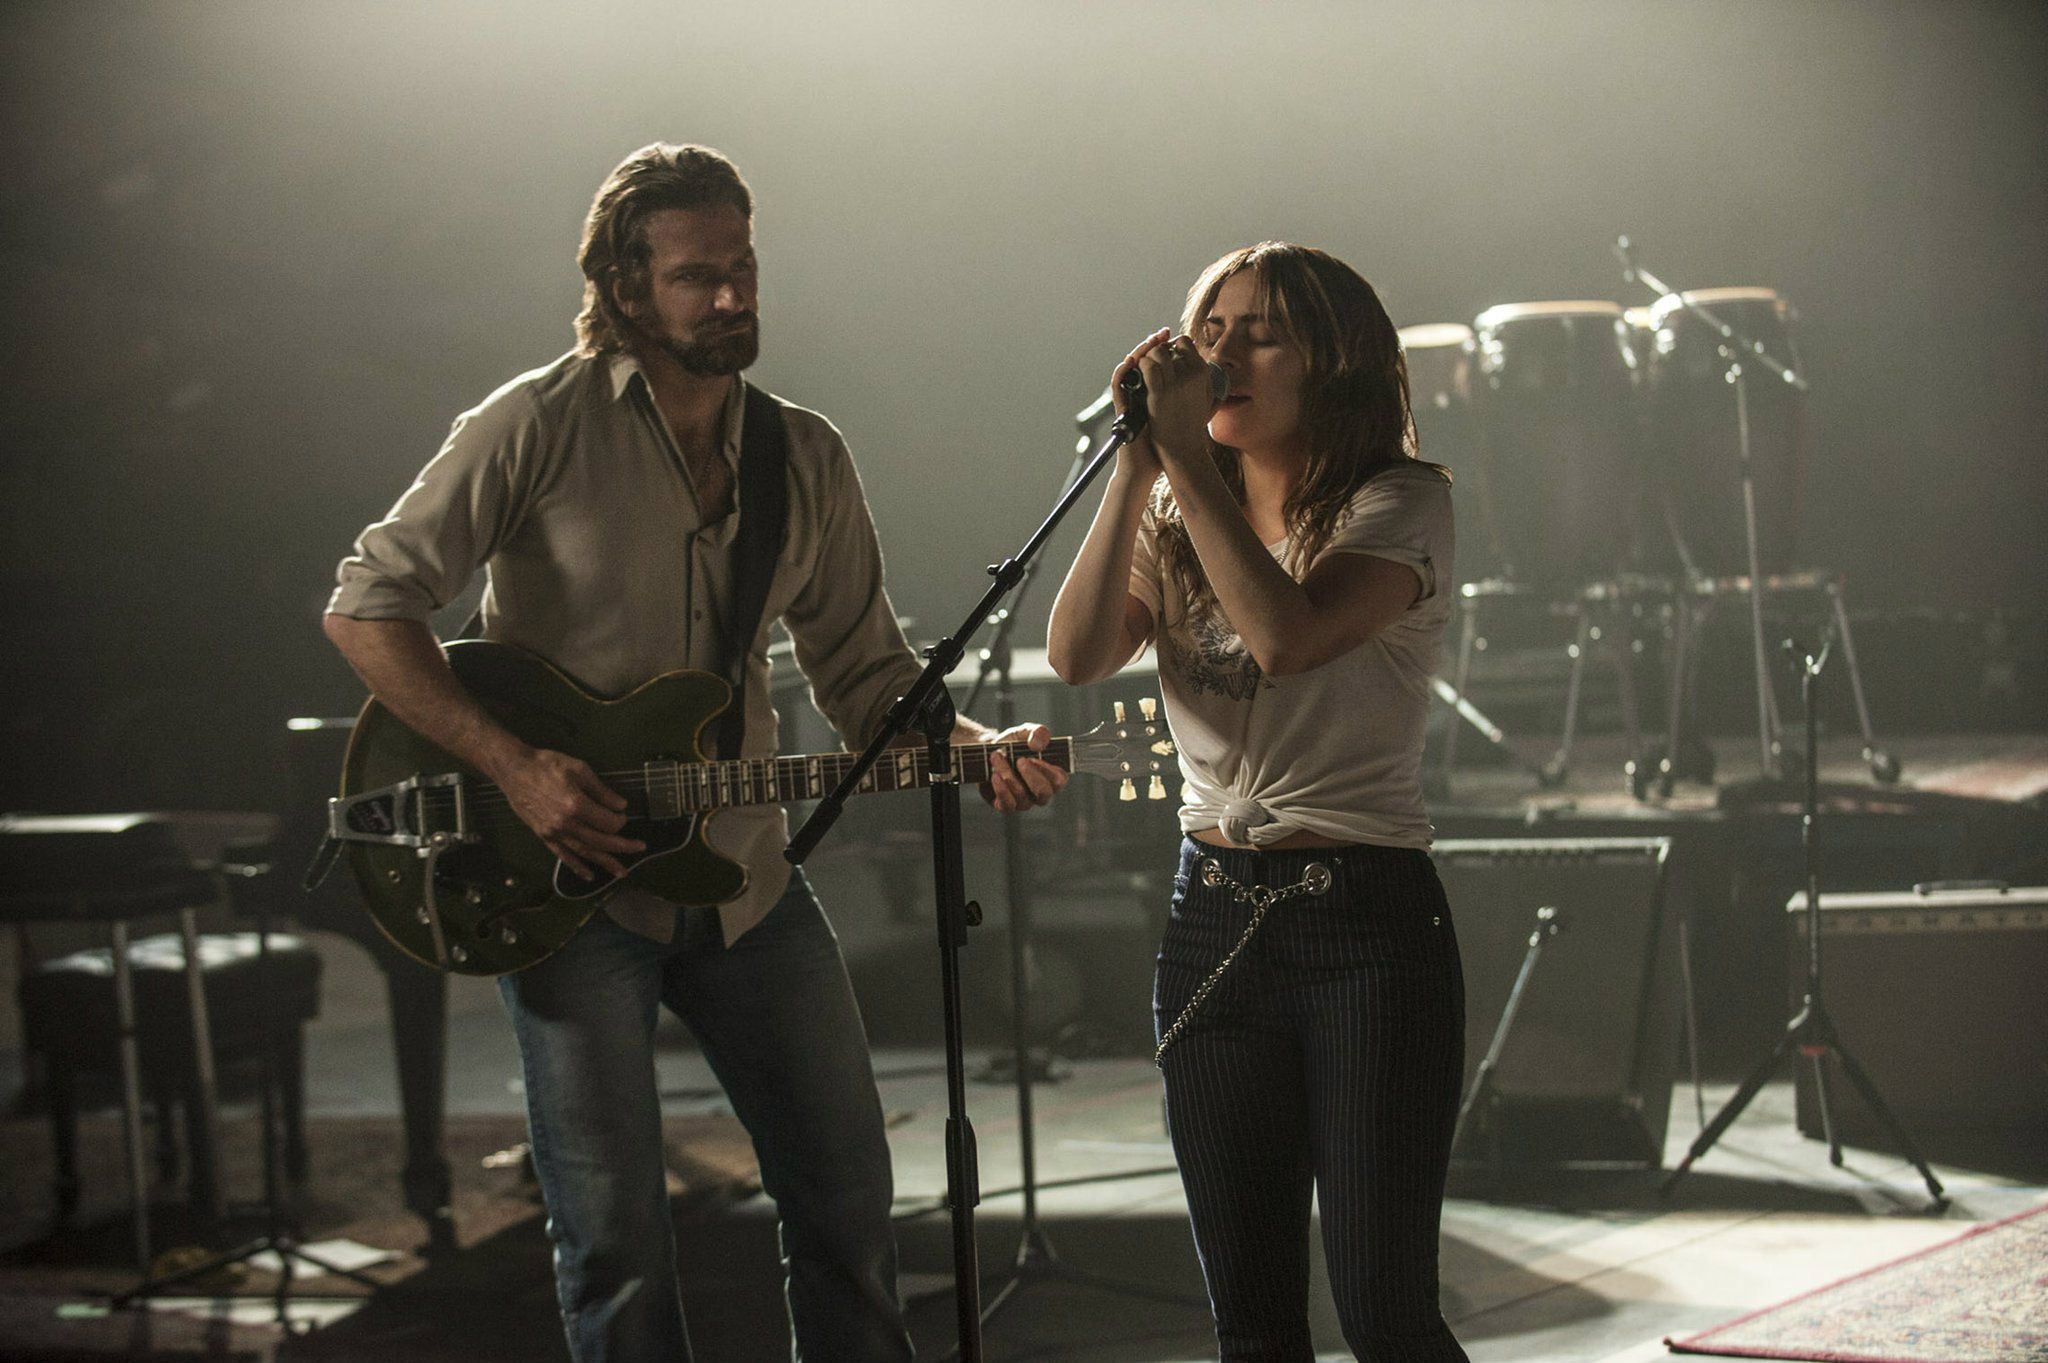 Lady Gaga’s A Star is Born Begins Filming; First Image Released